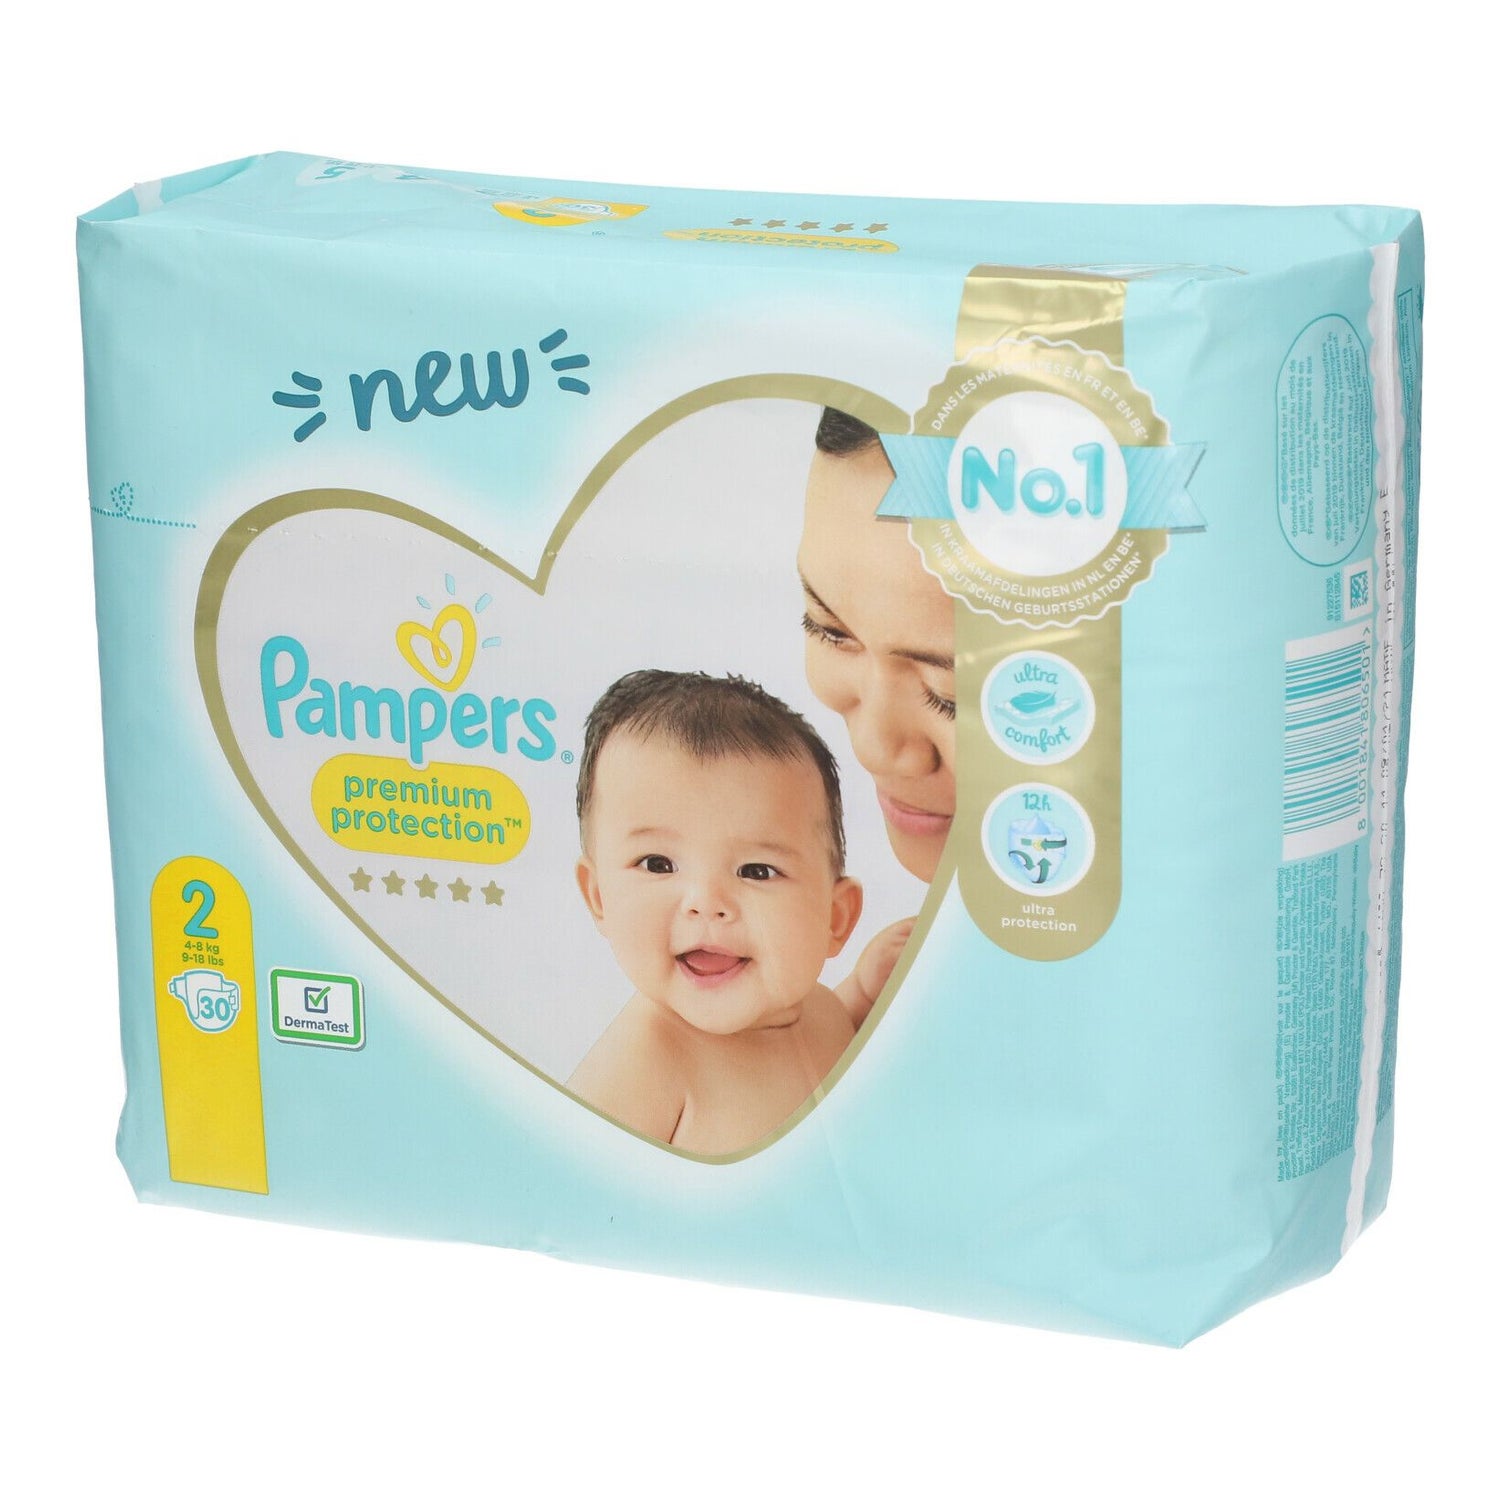 DODOT Sensitive Diapers Size 3 (6-10kg) 56 Units FAST SHIPPING 24H*